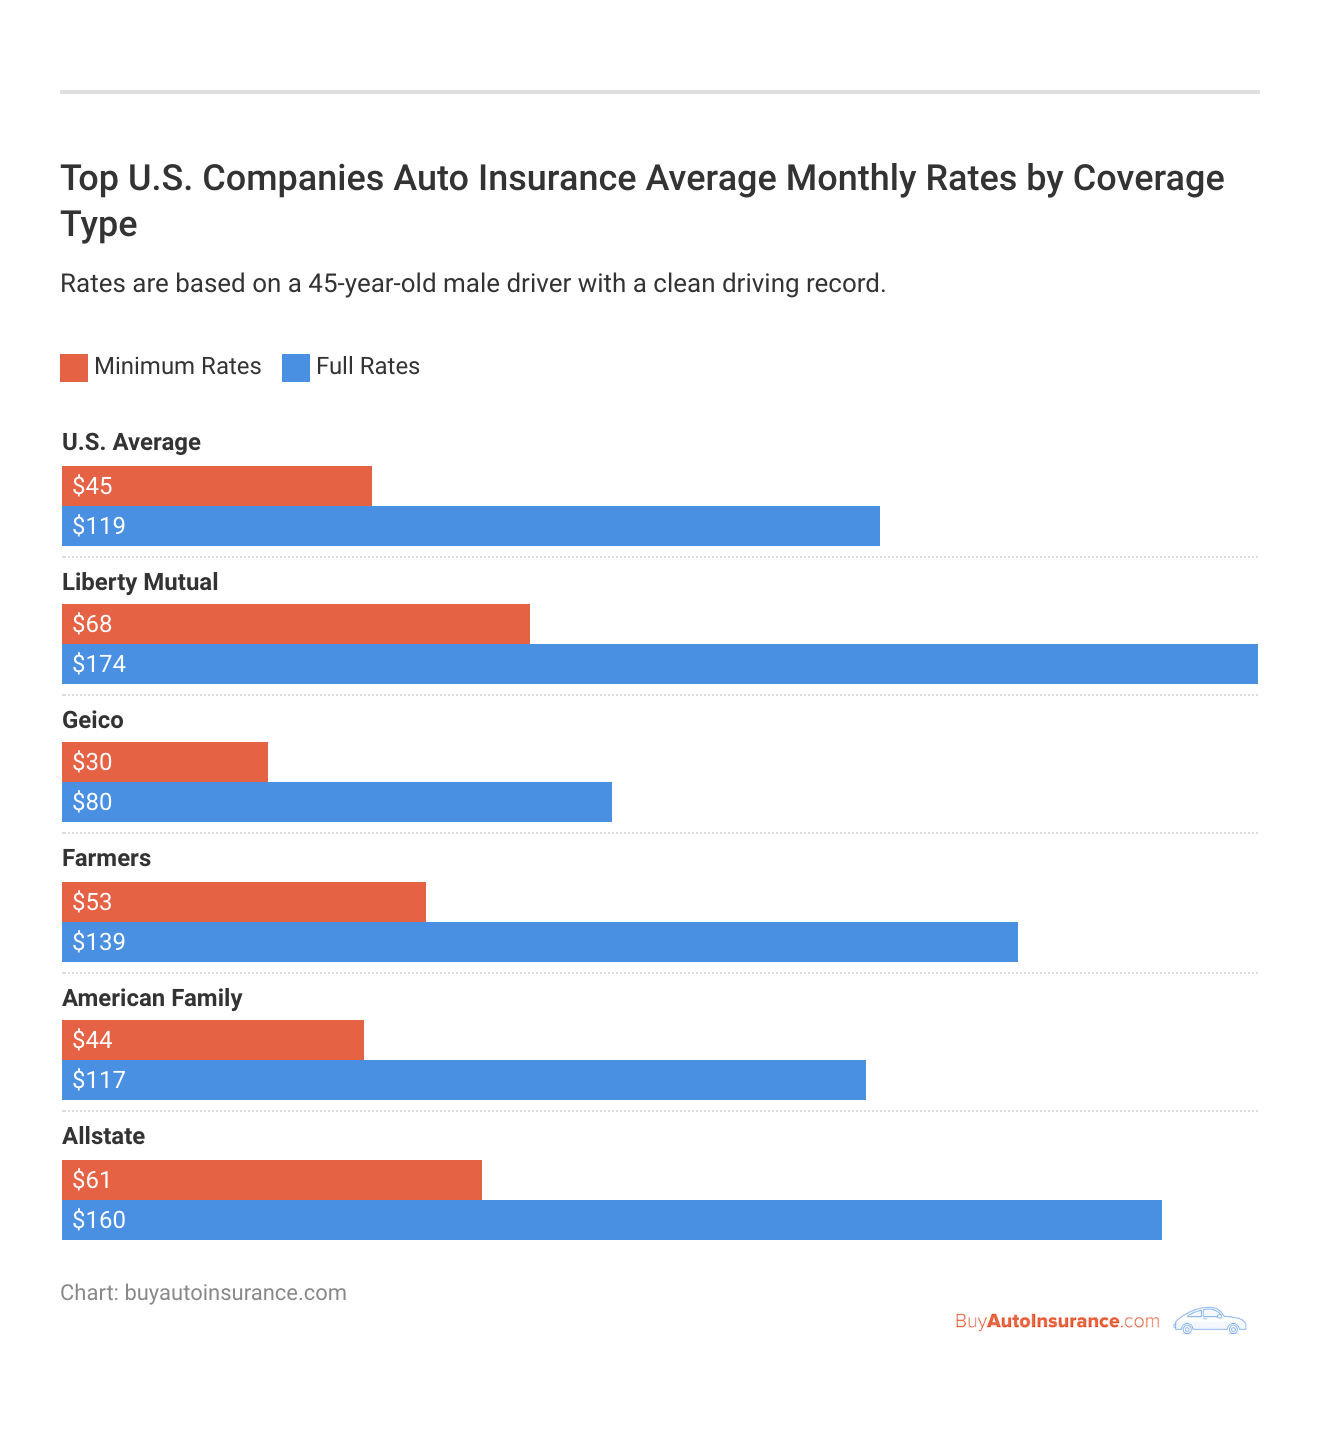 <h3>Top U.S. Companies Auto Insurance Average Monthly Rates by Coverage Type</h3>